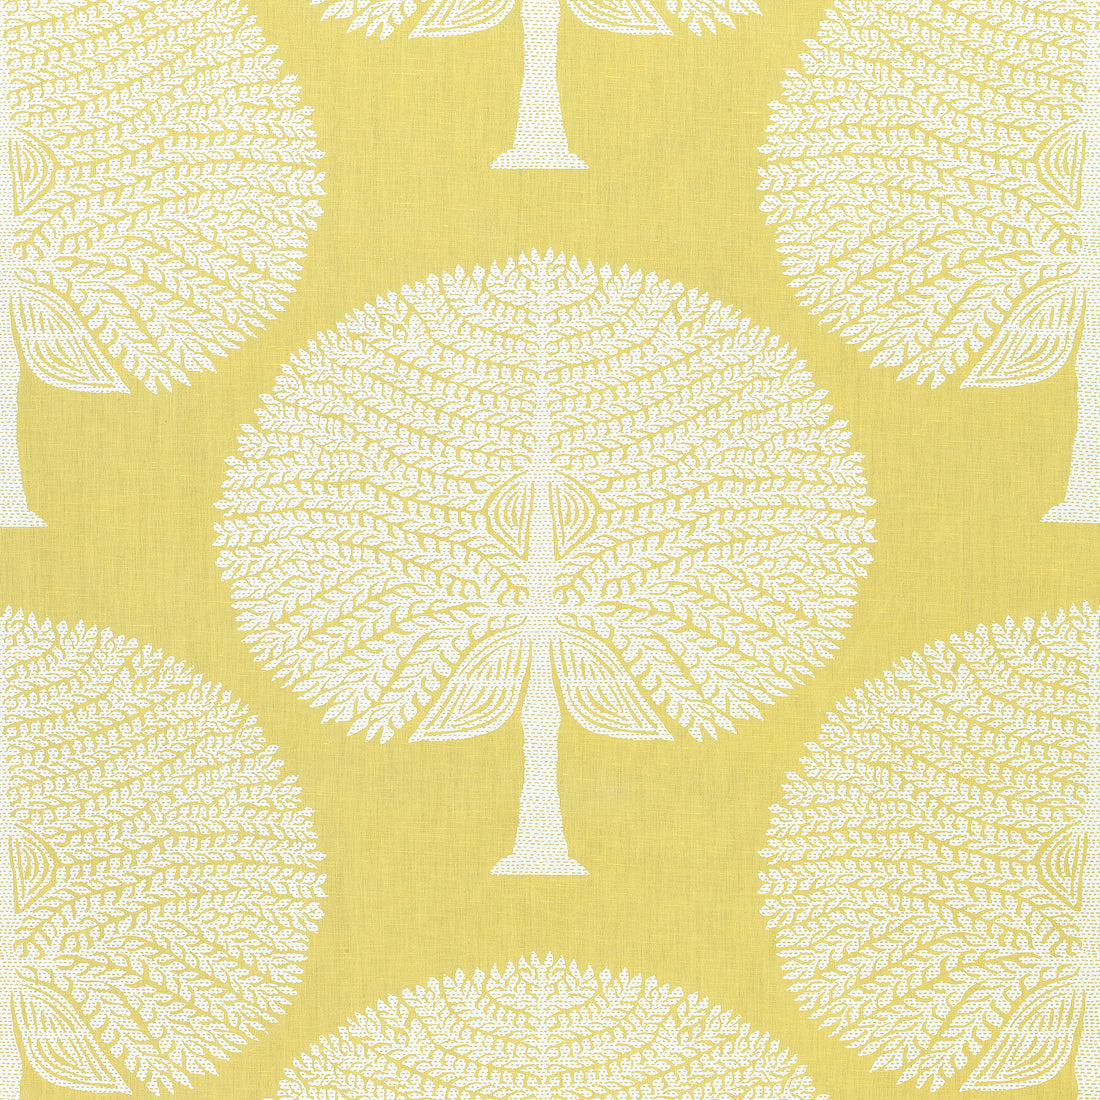 Mulberry Tree fabric in yellow color - pattern number F910605 - by Thibaut in the Ceylon collection